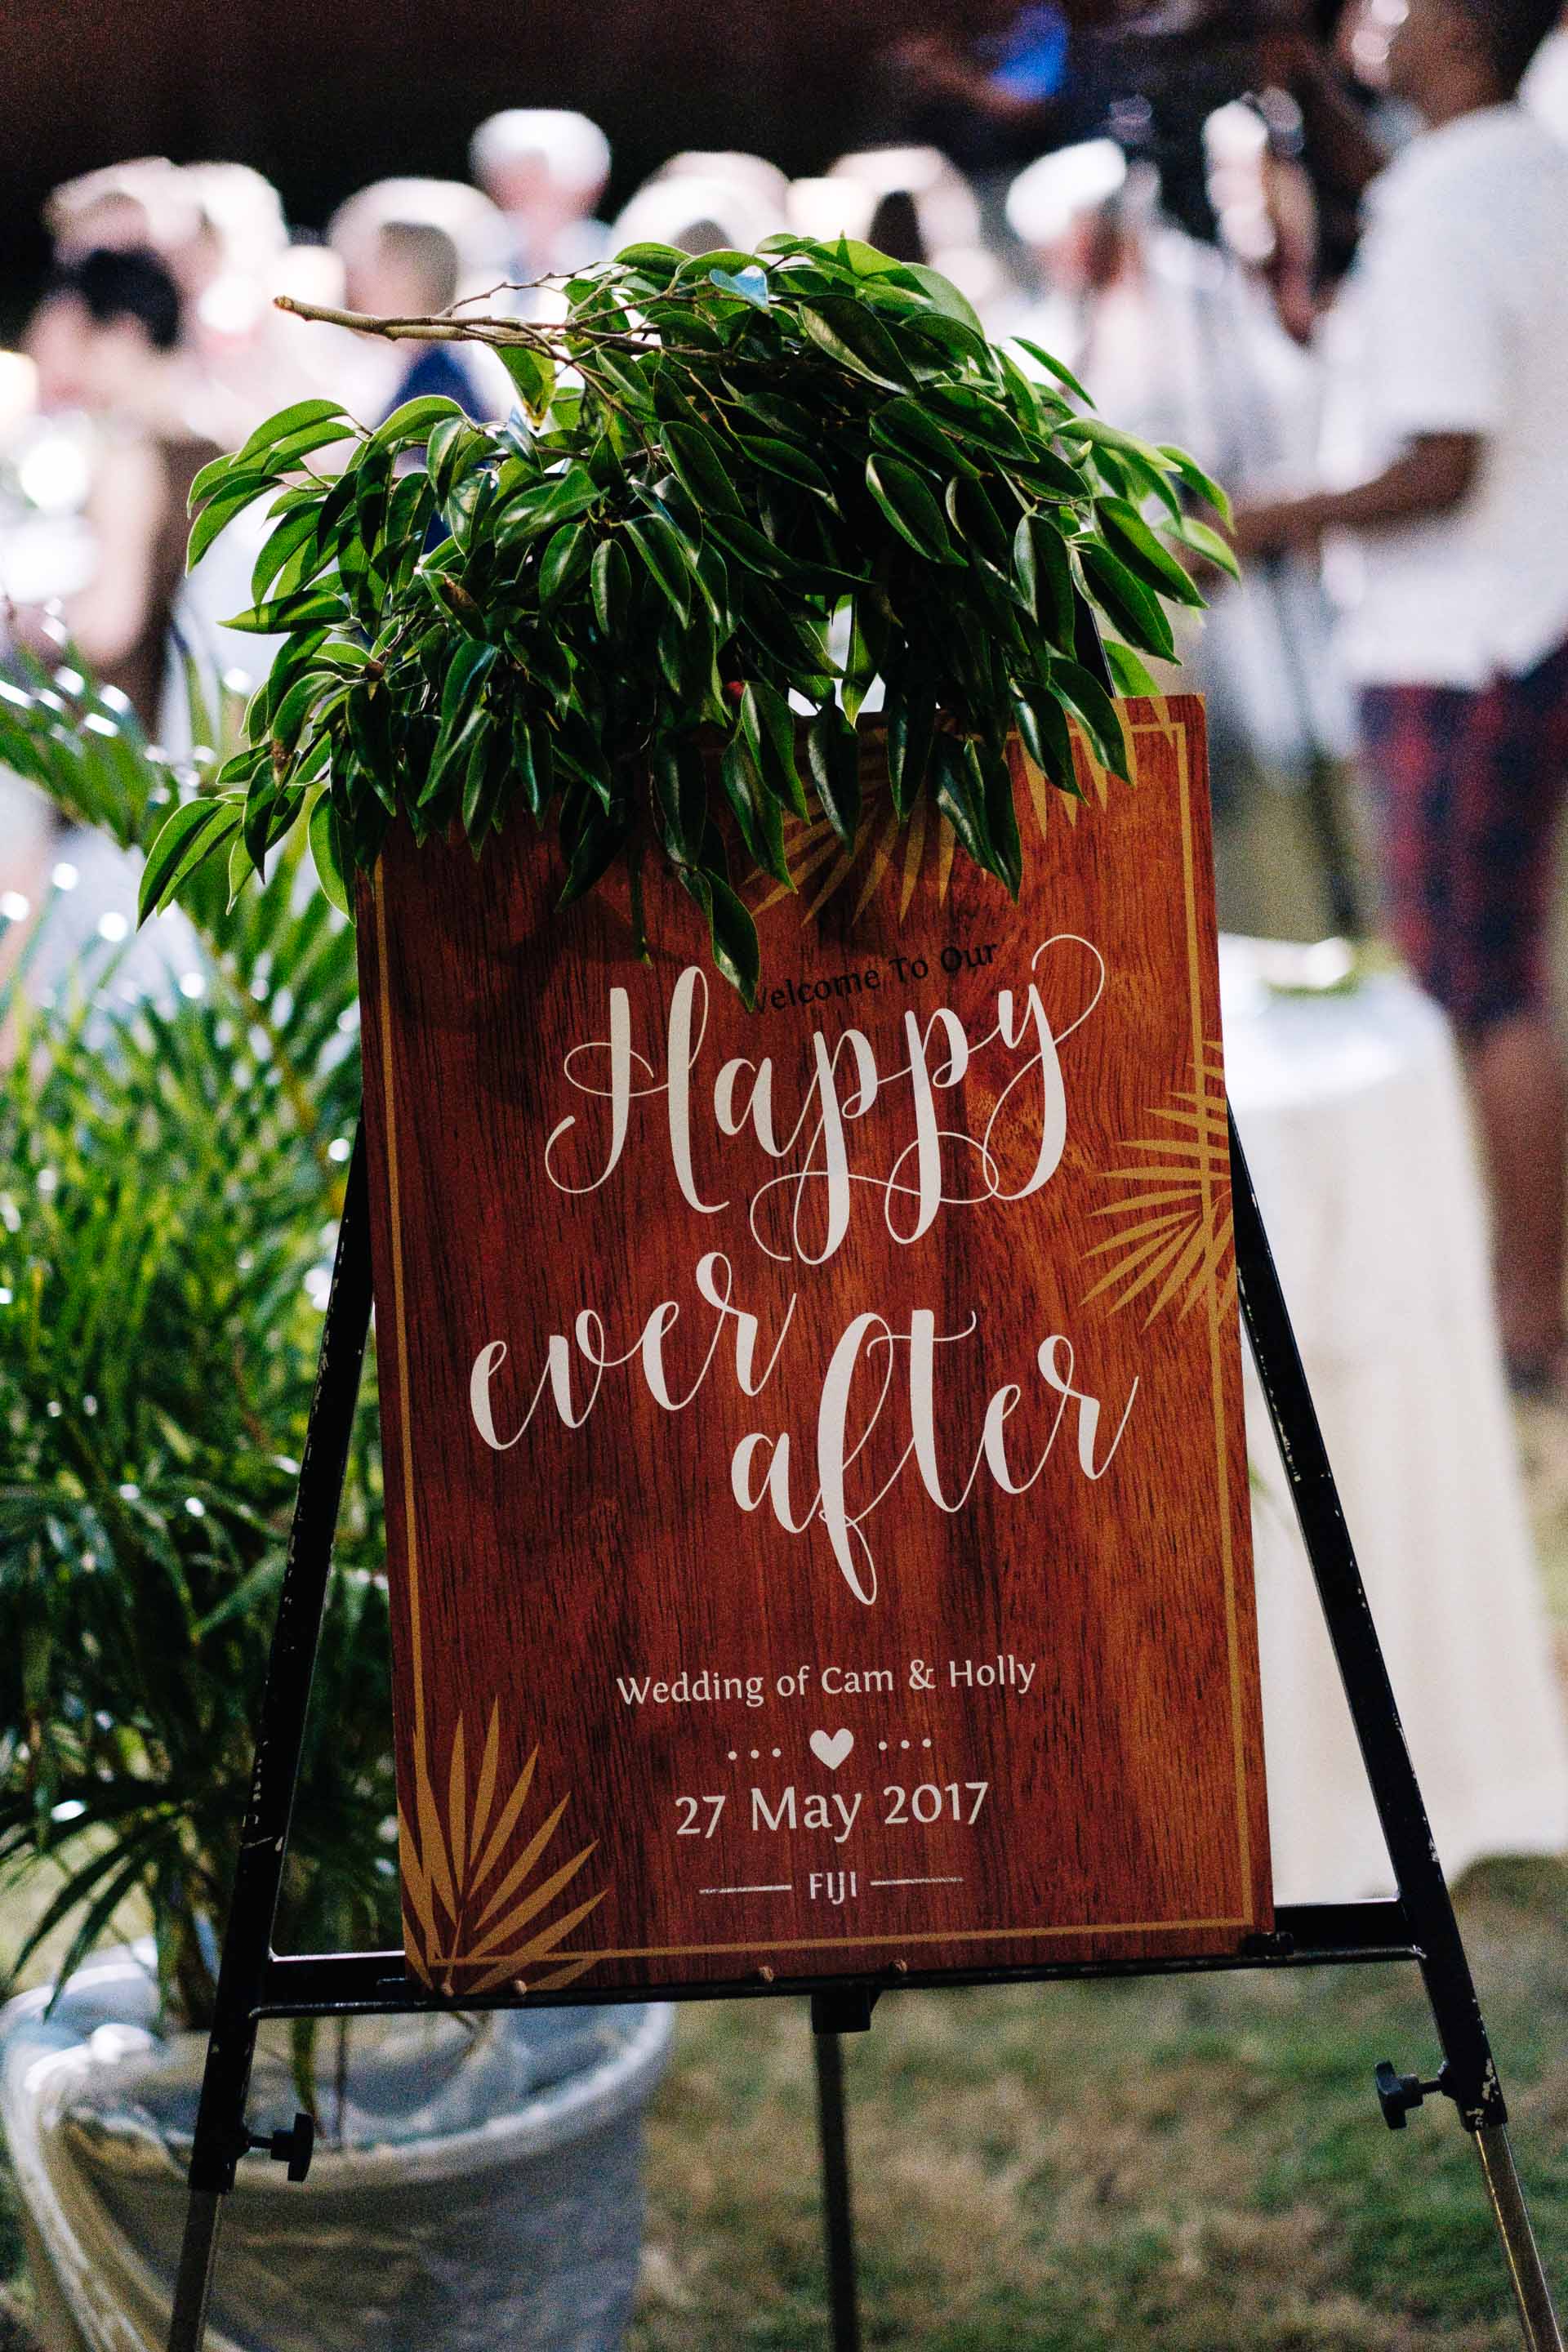 a cutom sign board for the reception venue with the words "happy ever after" printed on it